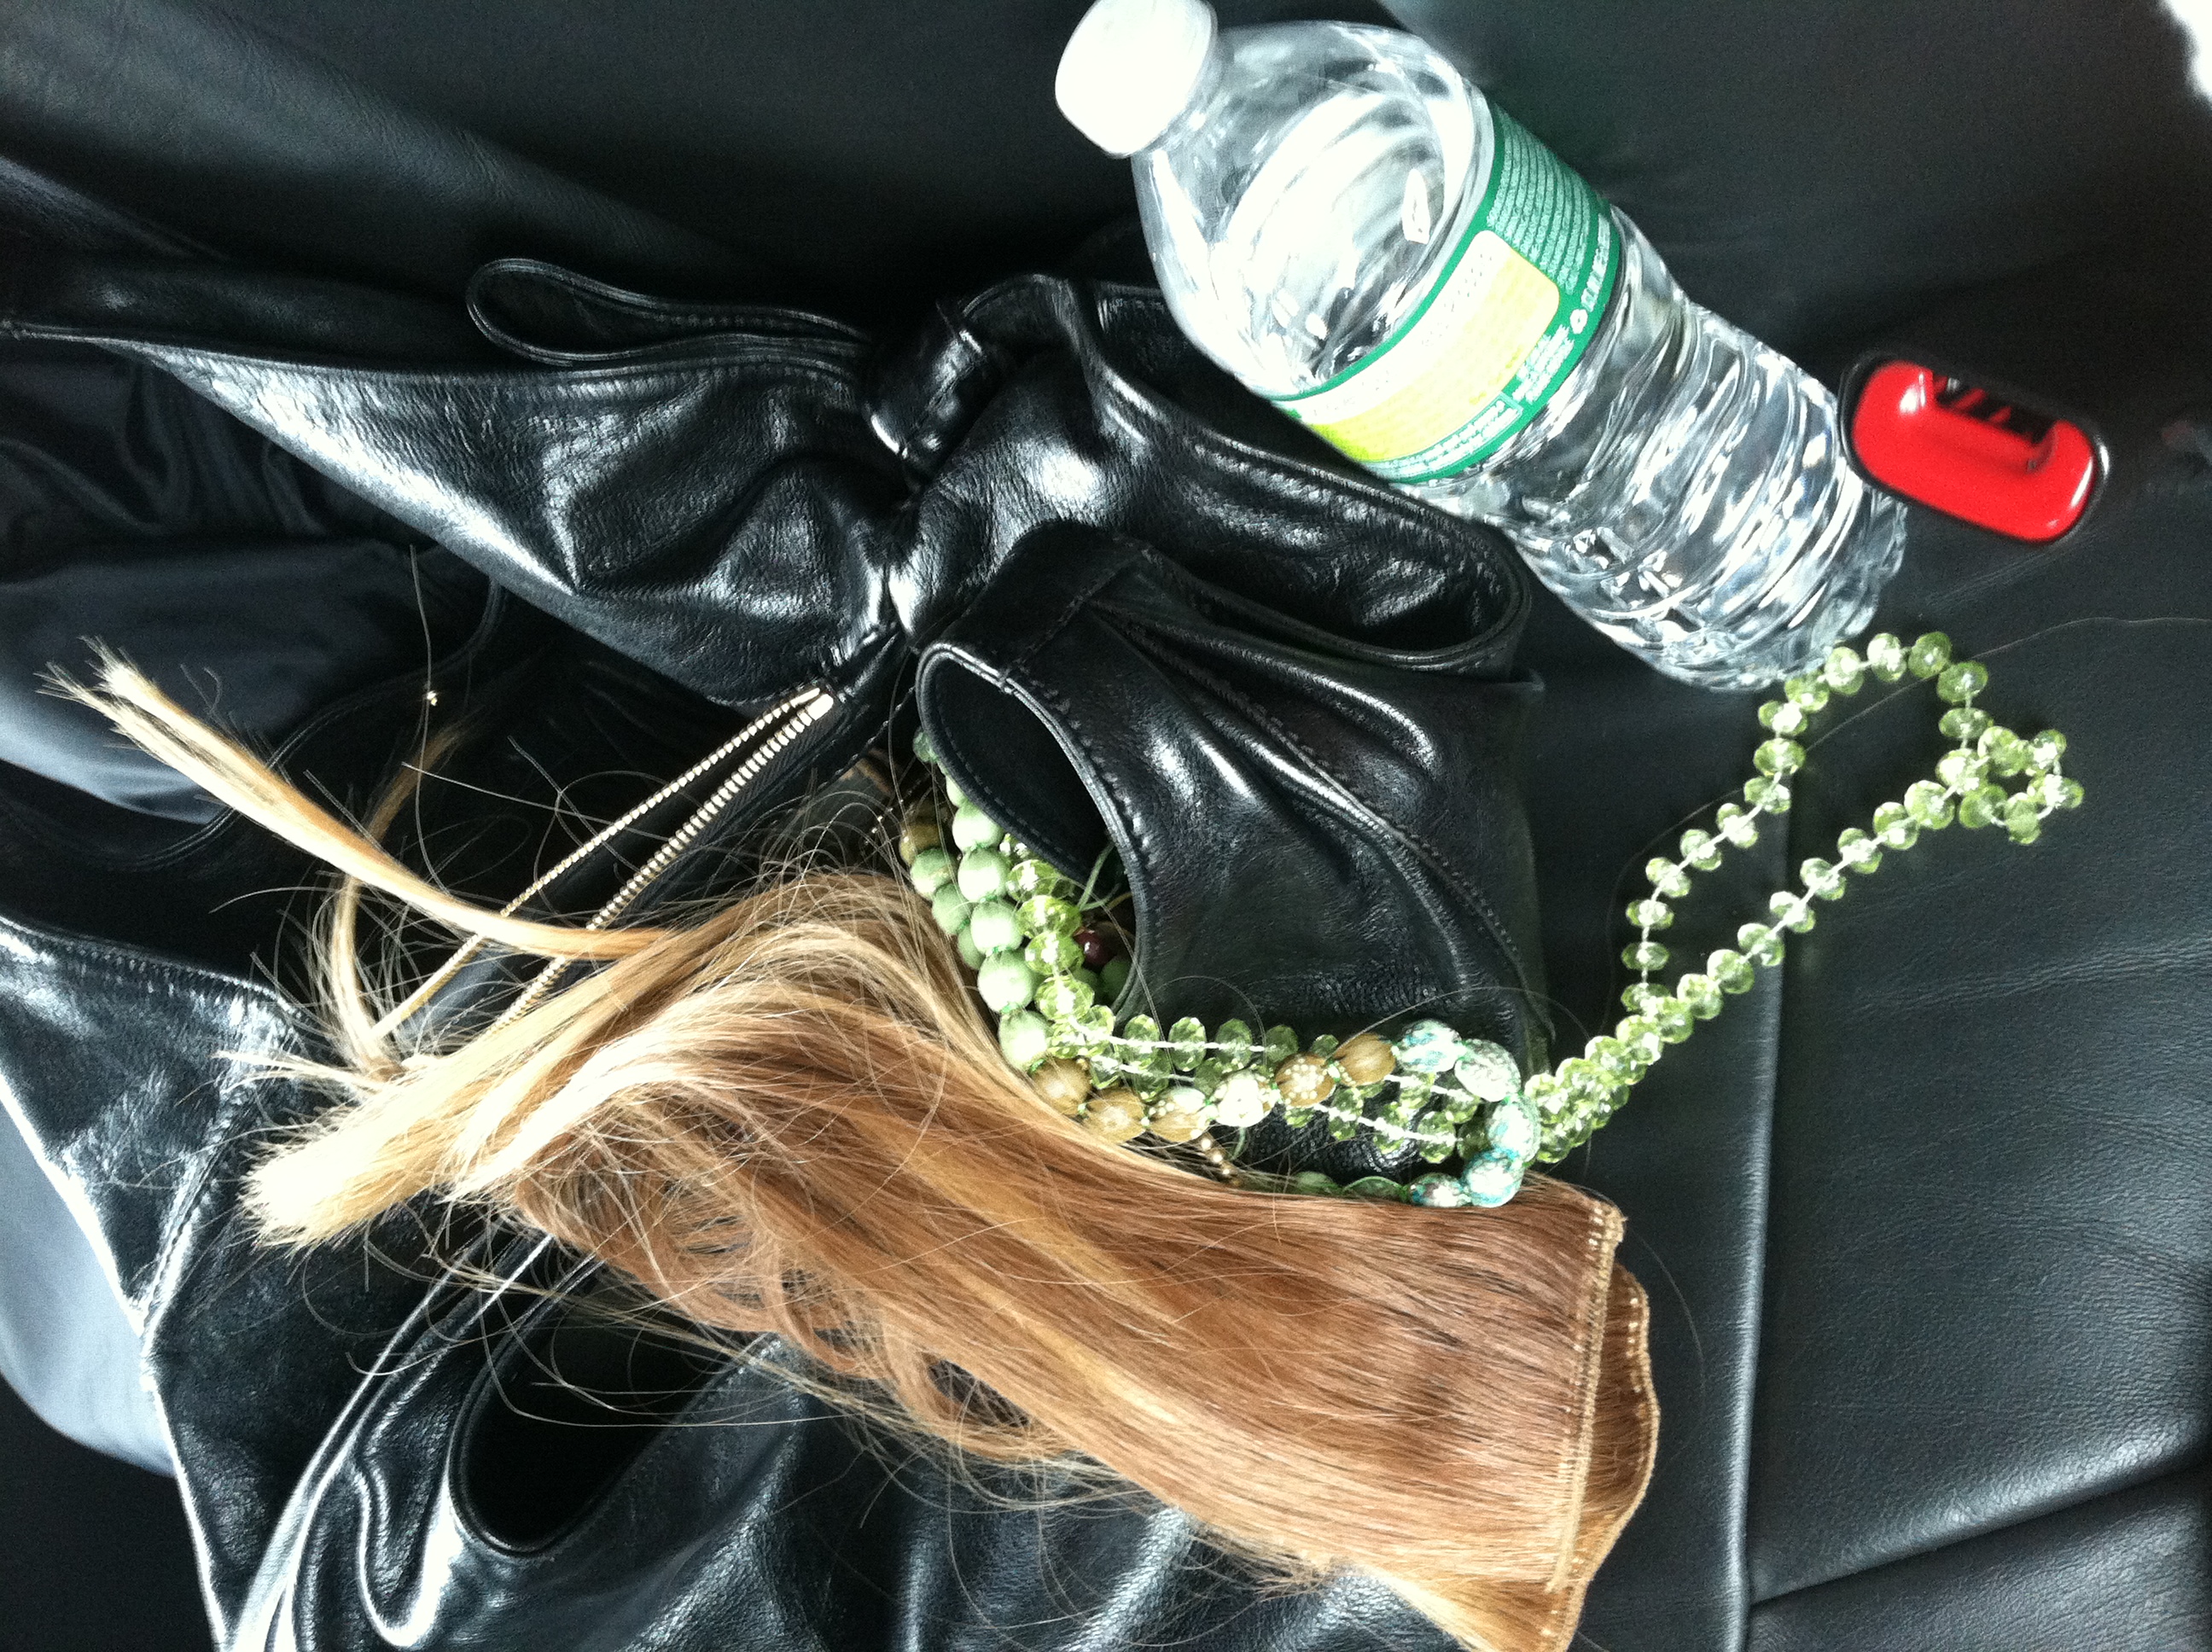 Extra hair and jewels bunched up on the backseat of a car... like a teenagers jeans.